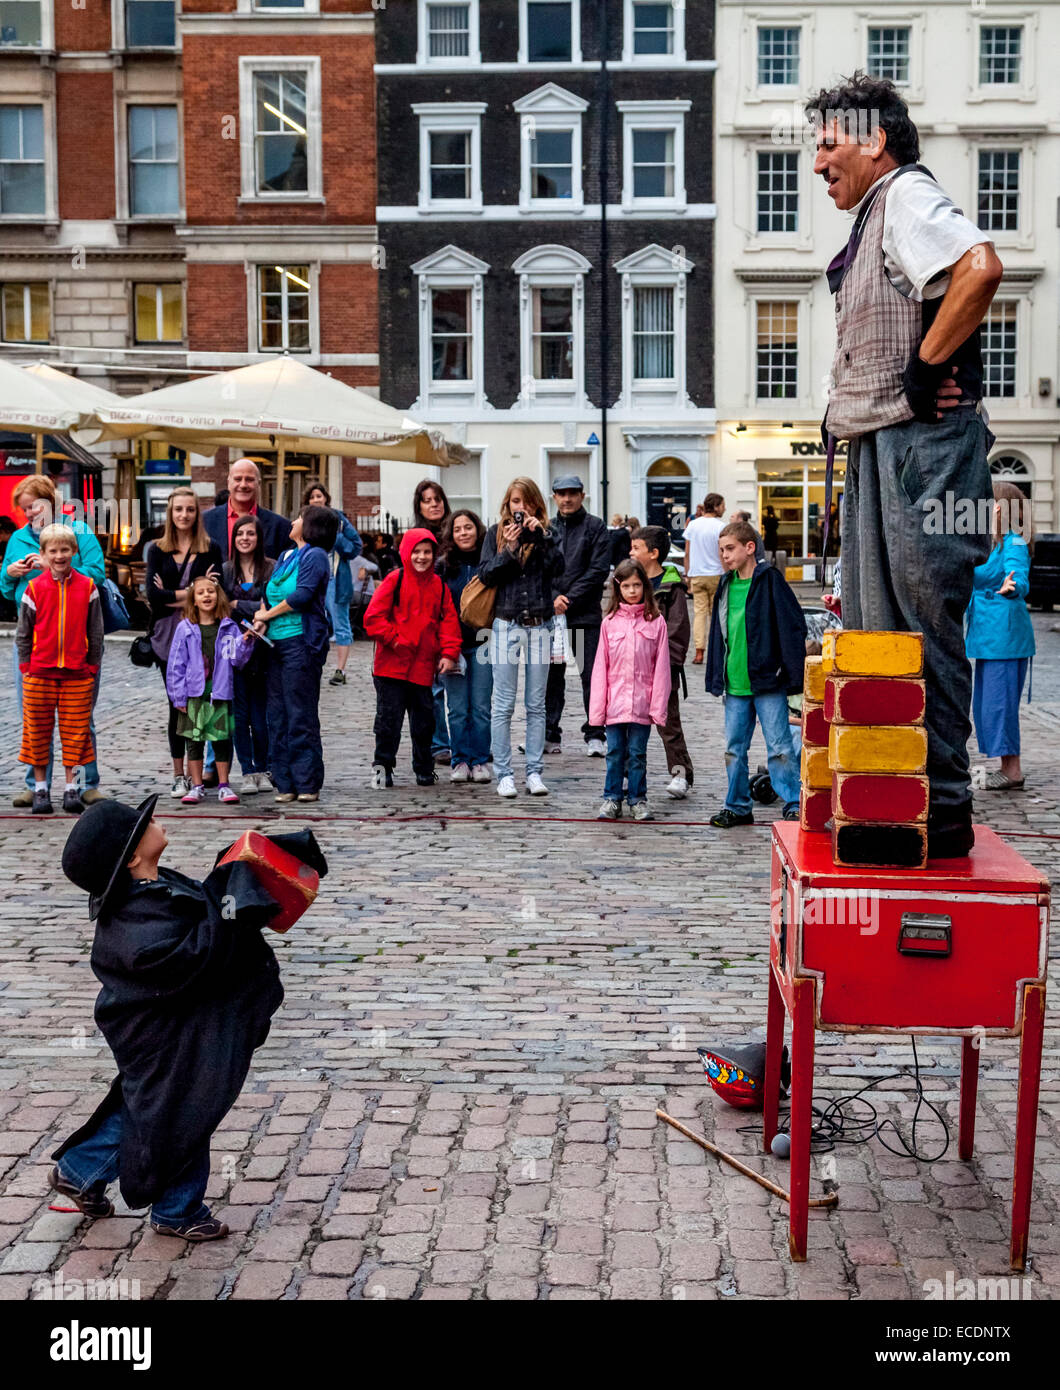 A Street Entertainer Performs In Covent Garden, London, England Stock Photo